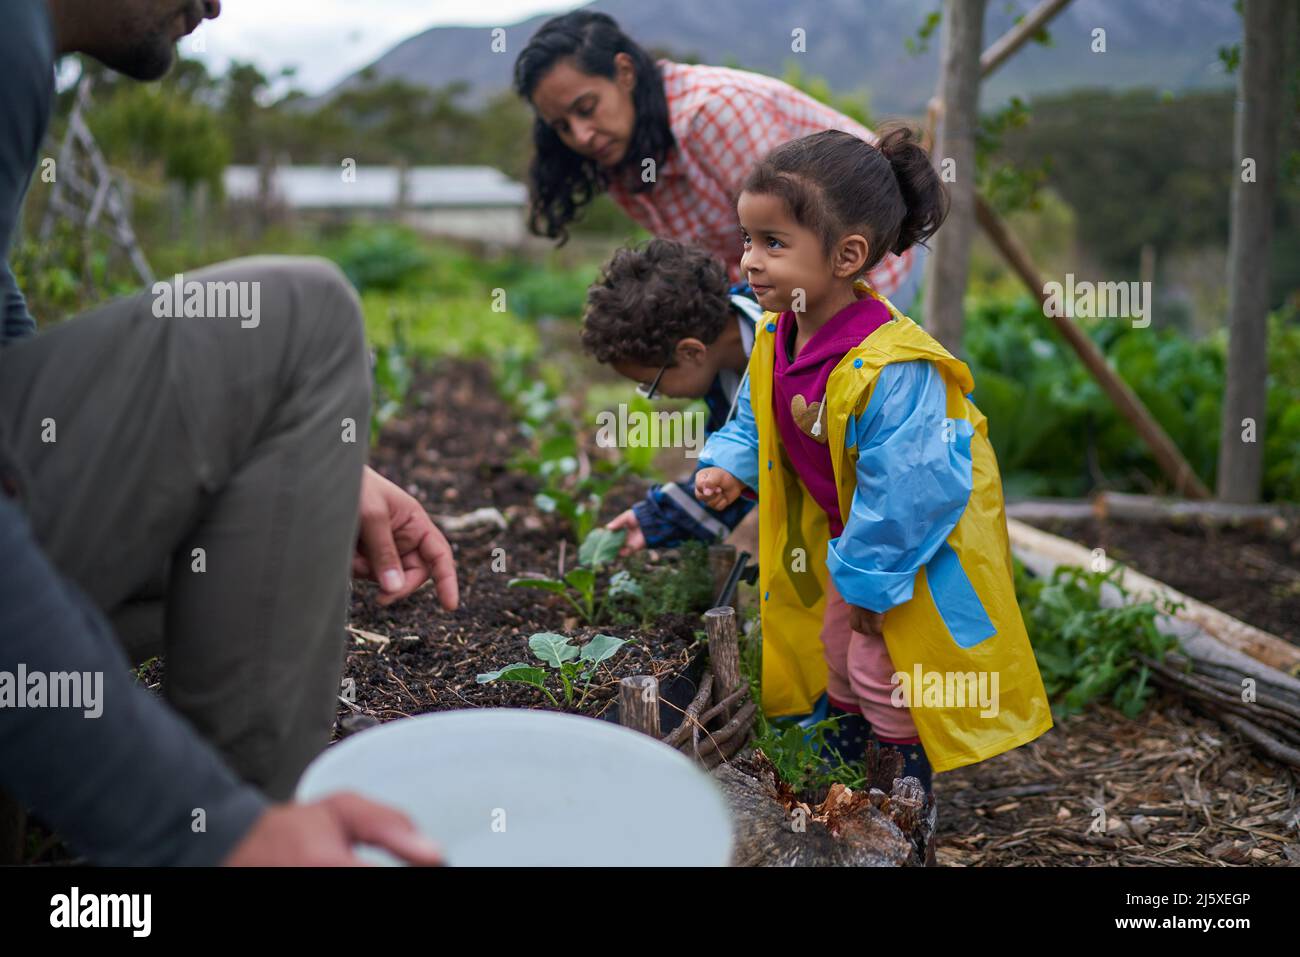 Cute toddler girl gardening with family Stock Photo